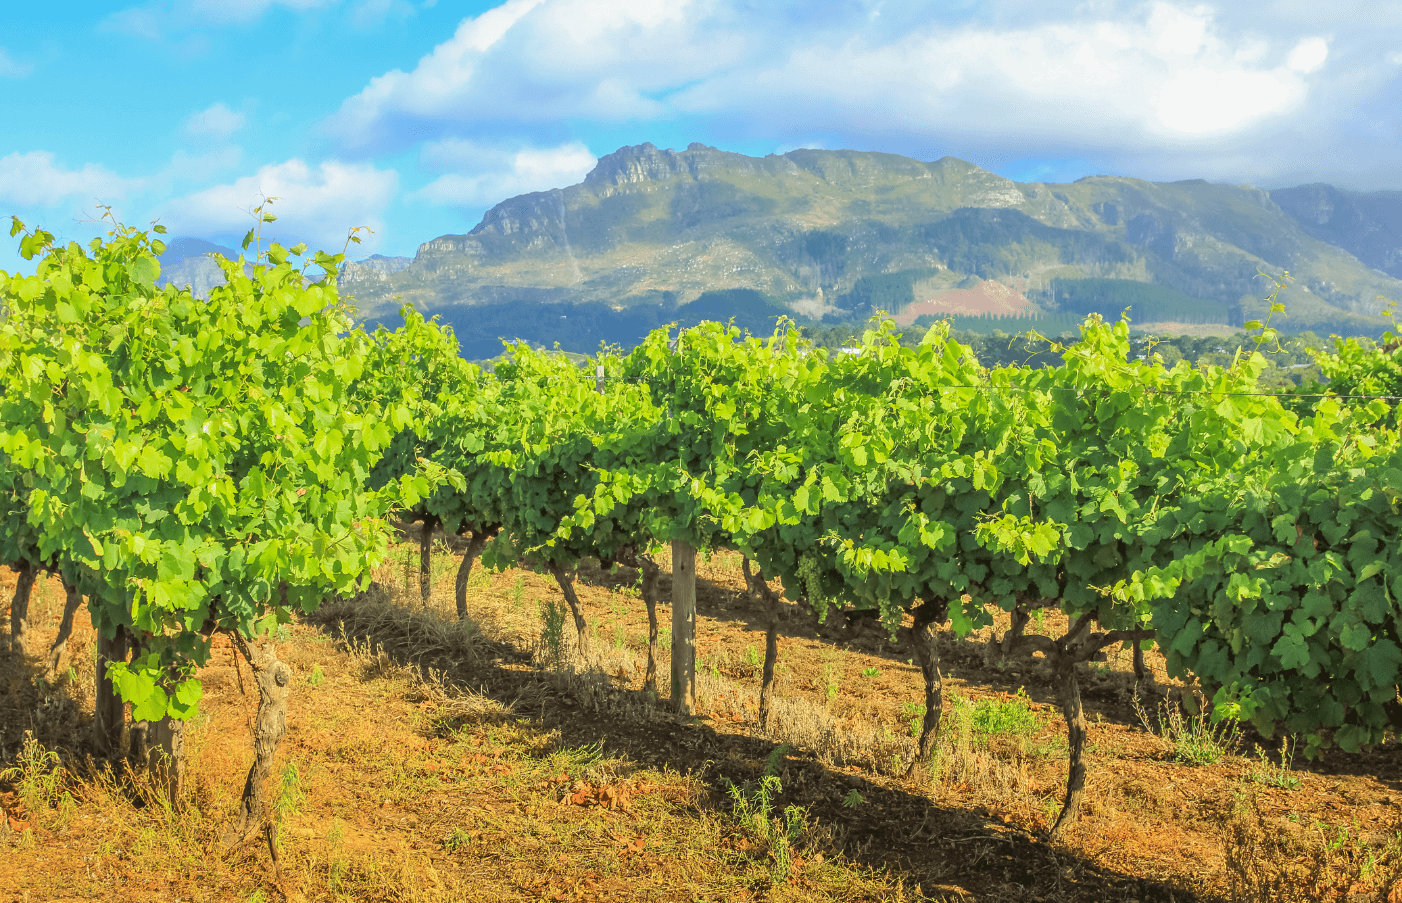 Day 4: Cape Winelands